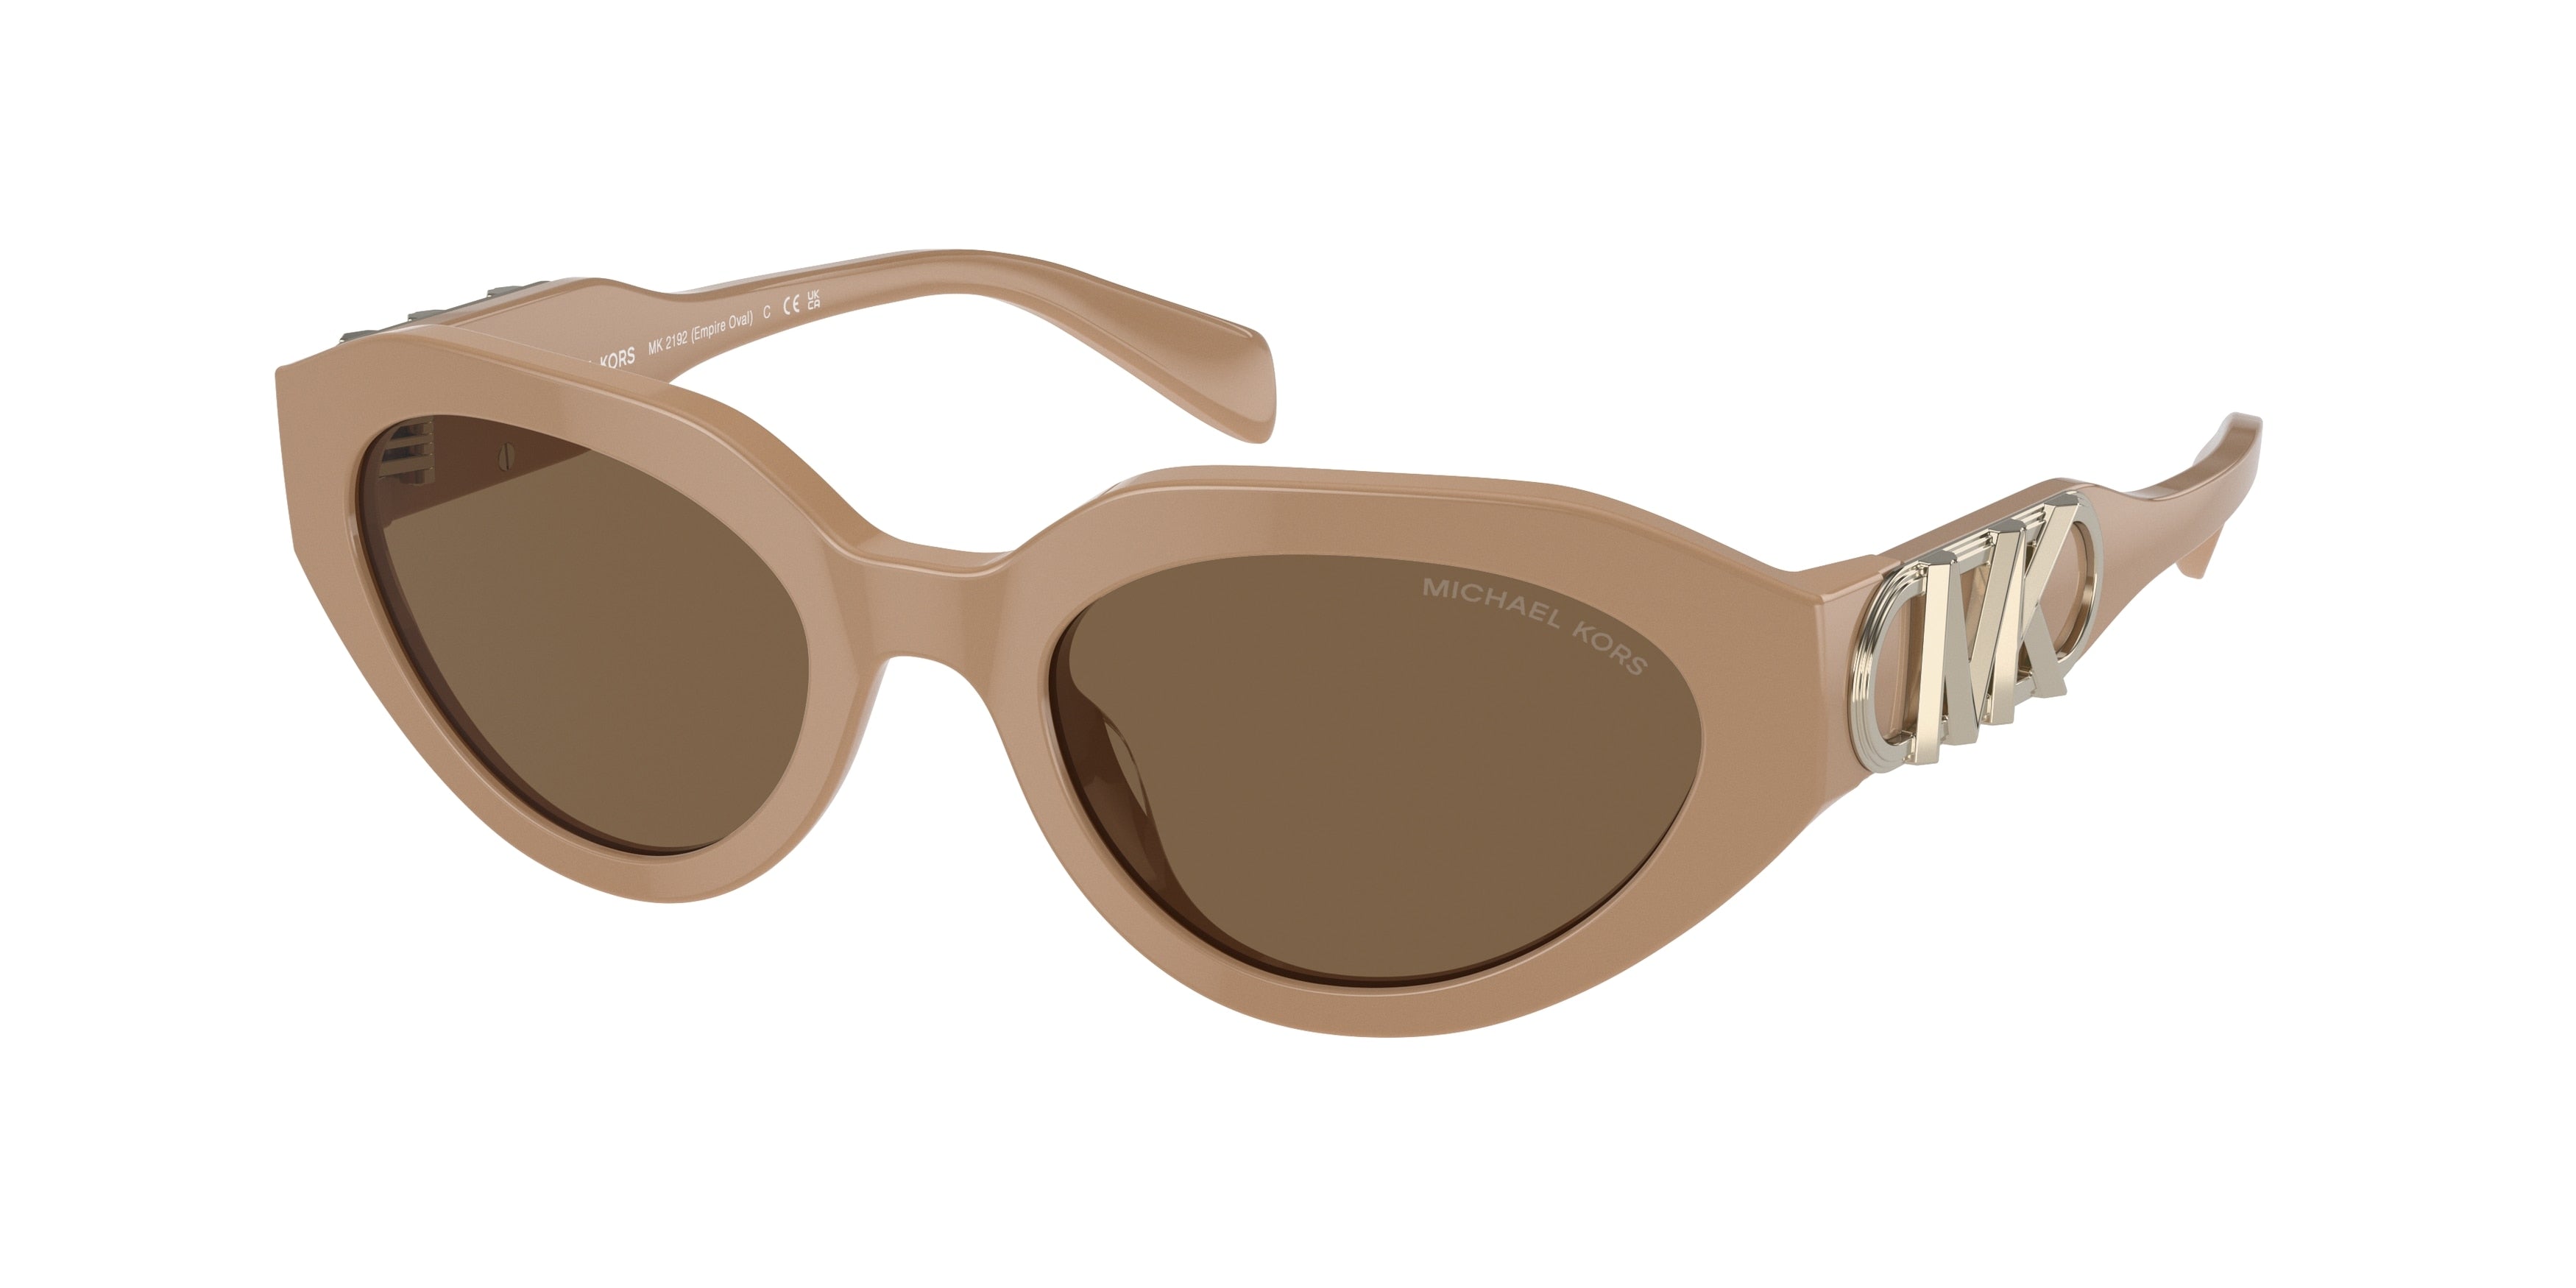 Michael Kors EMPIRE OVAL MK2192 Oval Sunglasses  355573-Camel 53-140-20 - Color Map Brown